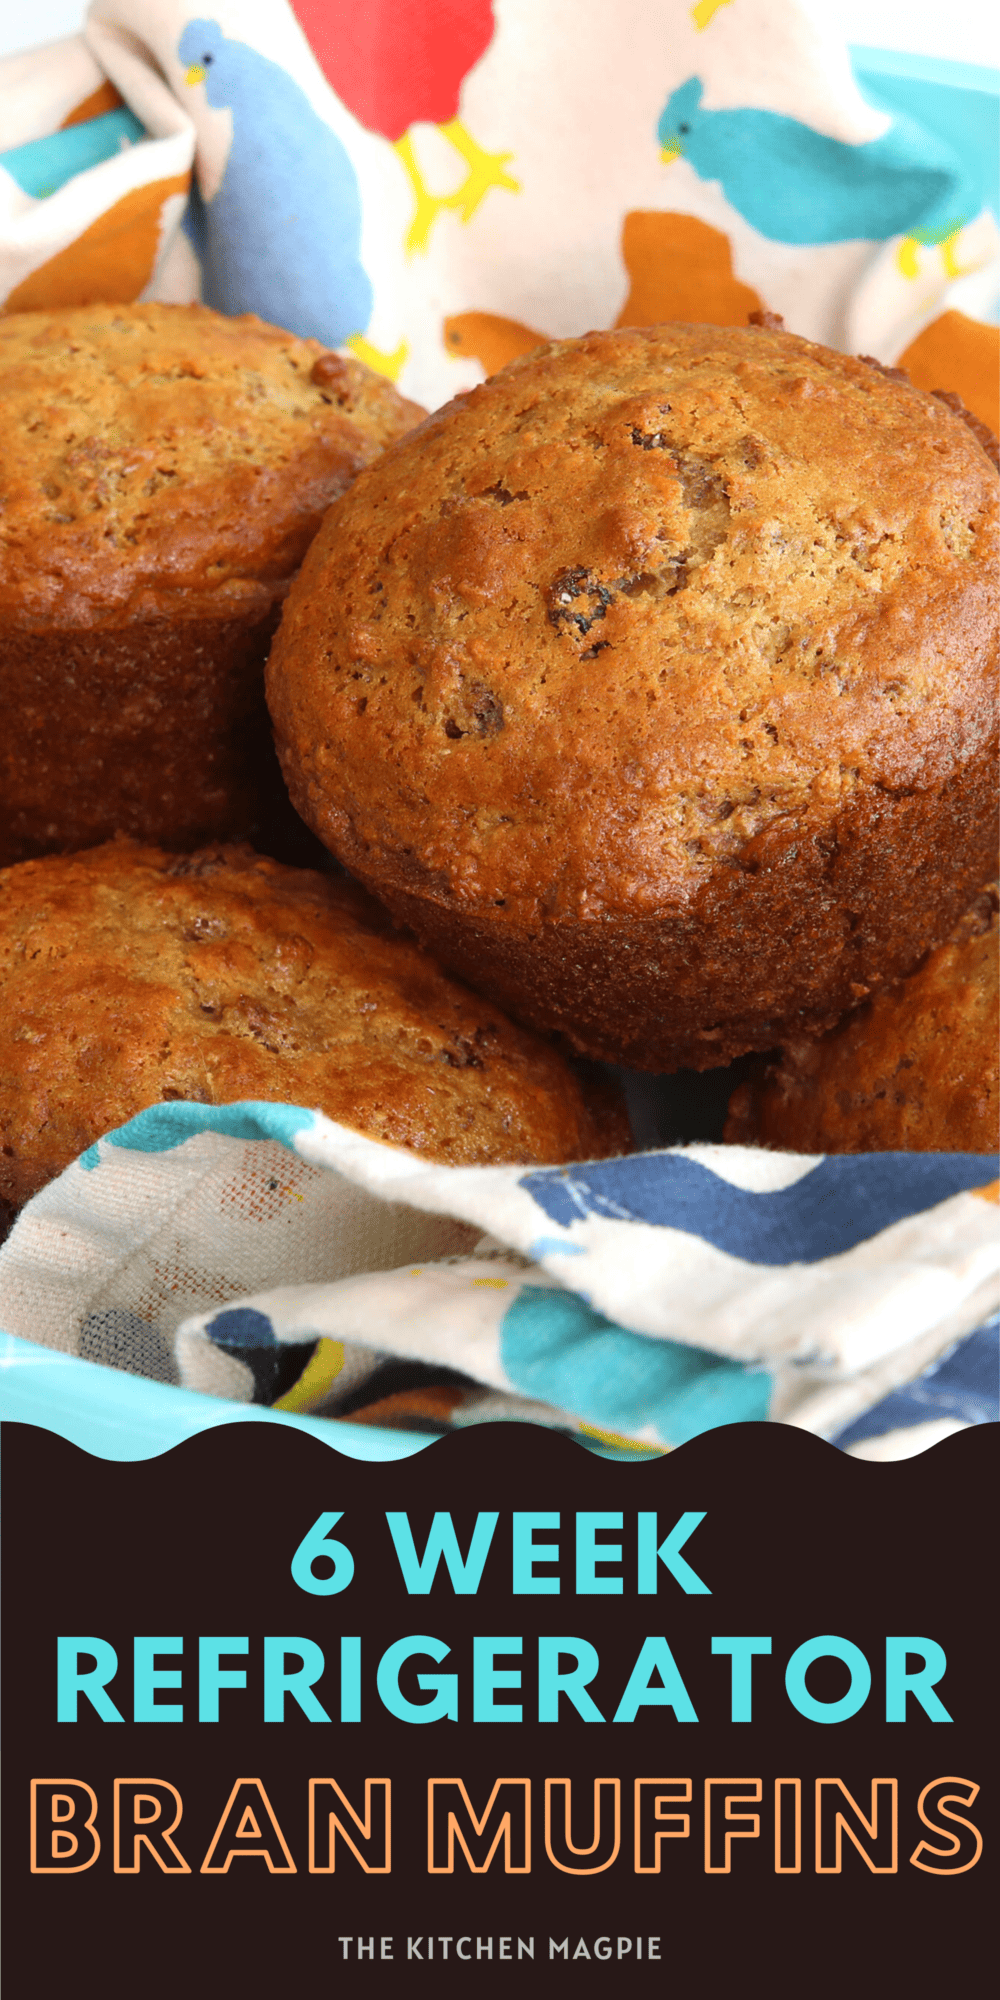 This is the classic 6 week refrigerator bran muffin recipe, using bran buds and bran flakes. Raisins are optional but delicious!